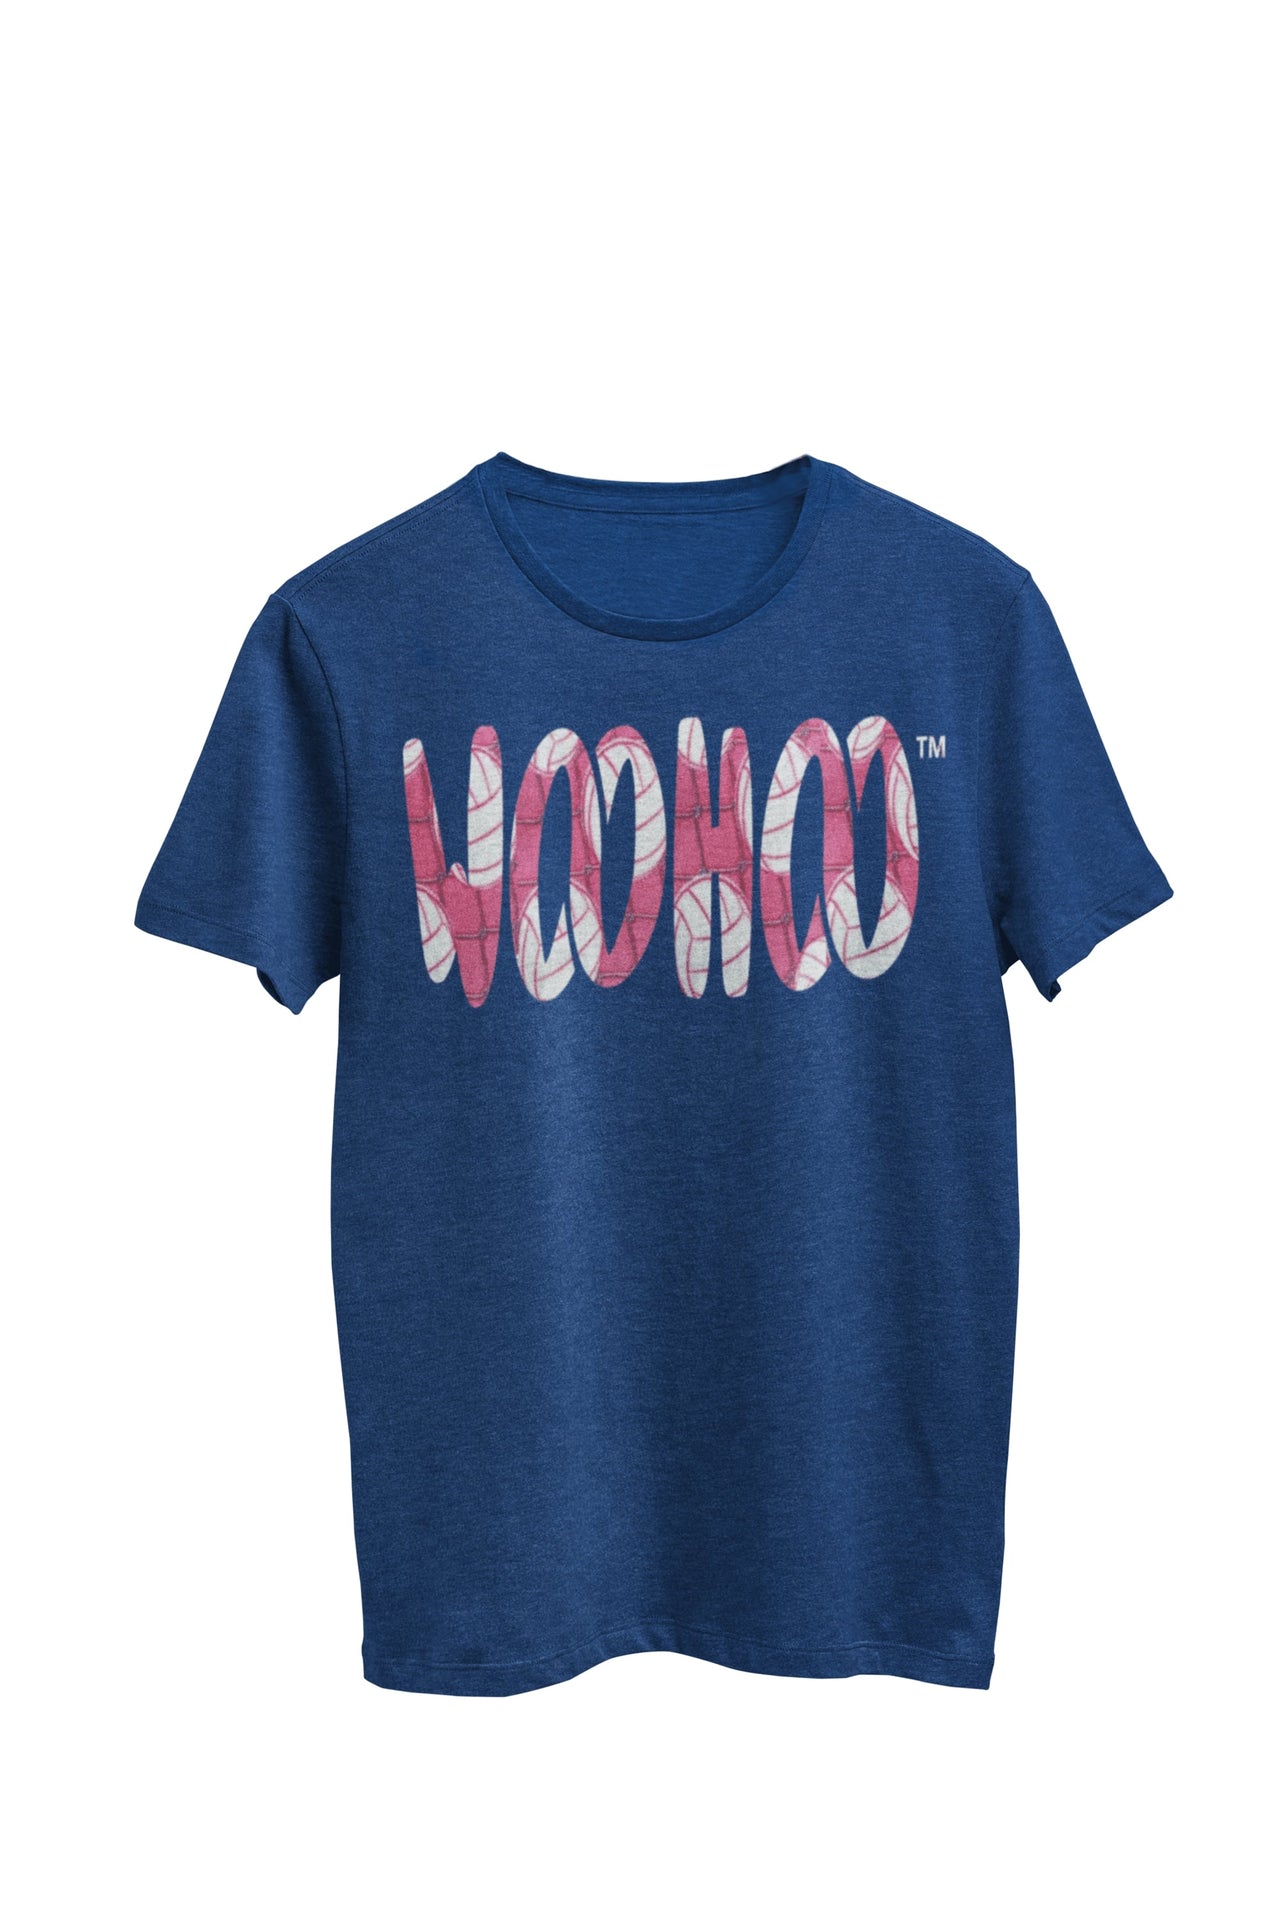 Heather navy unisex t-shirt designed by WooHoo Apparel.  The design features a larger 'woohoo' font with volleyball print inside the outline.